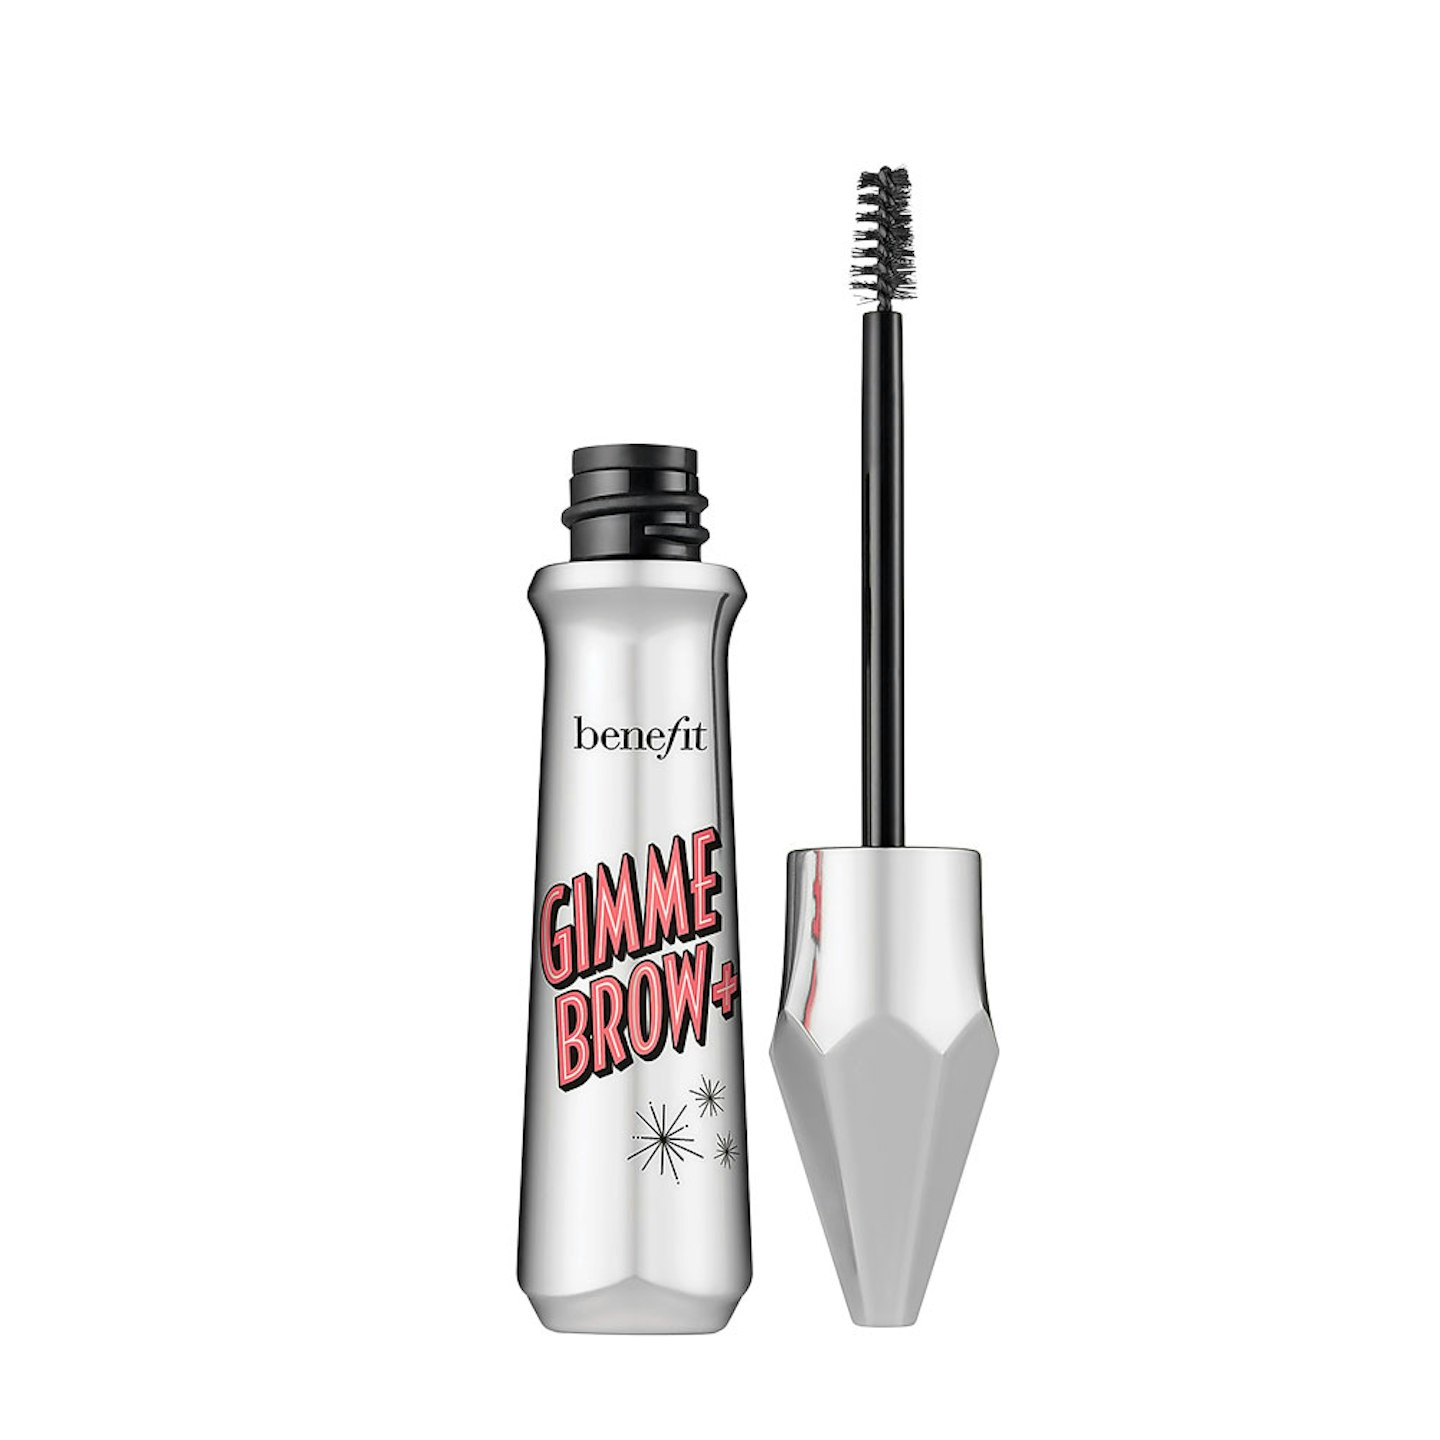 Benefit Gimme Brow+ Volumizing Eyebrow Gel, 20.50 from Boots